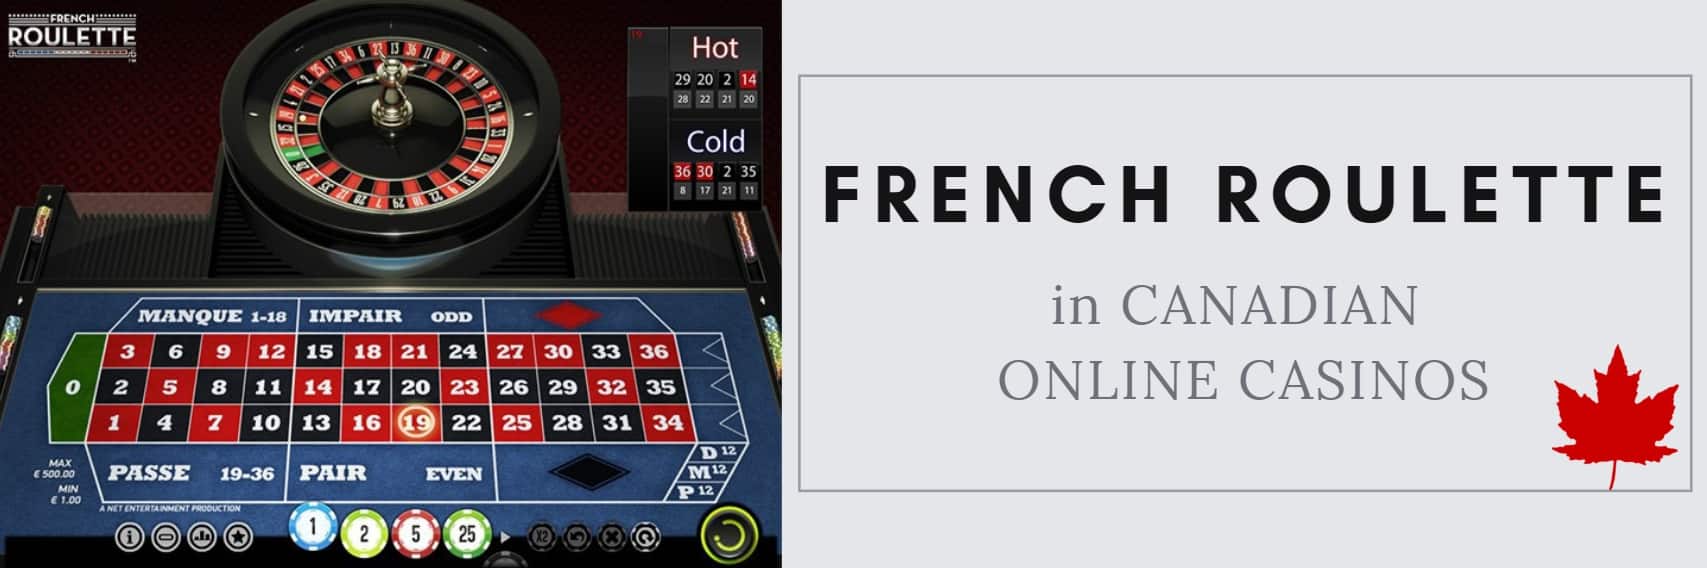 french roulette canadian casinos